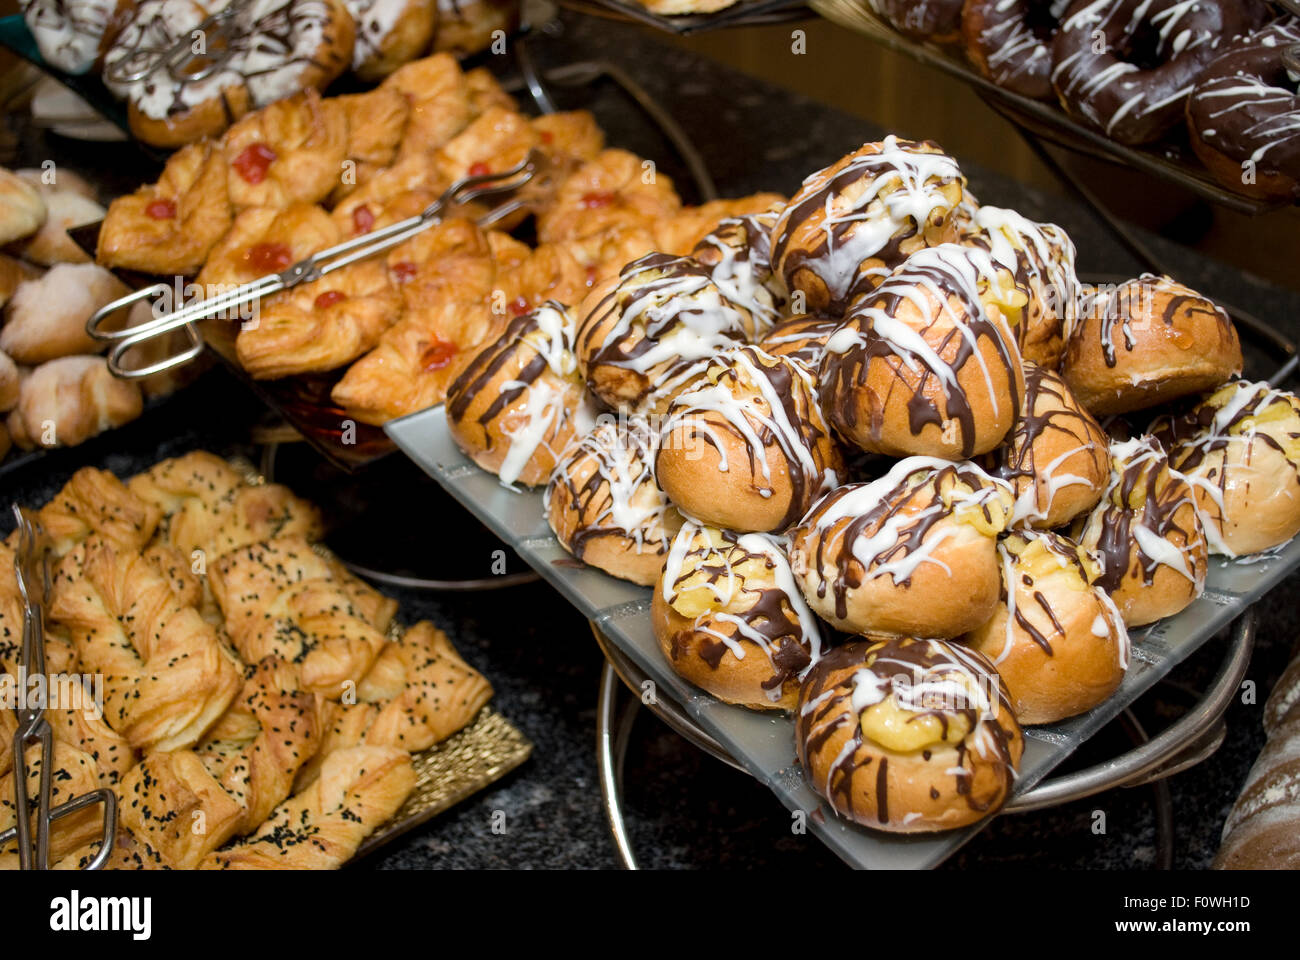 Breakfast pastries on a cruise ship on the Nile River, Egypt. Stock Photo